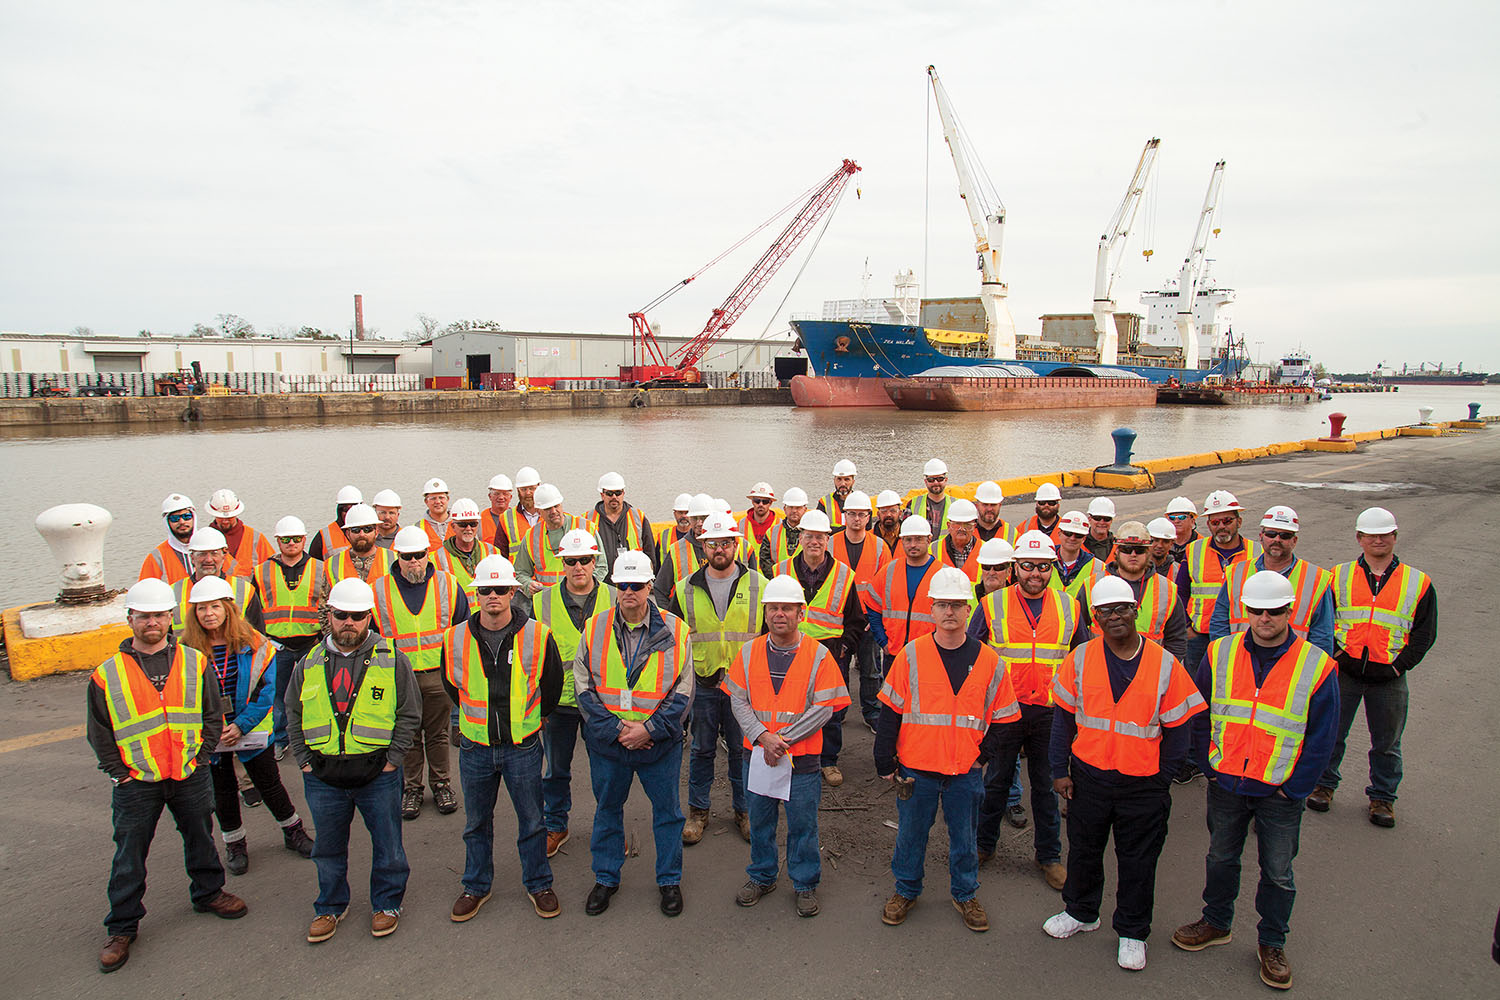 Personnel from the U.S. Army Corps of Engineers gather for a group photo alongside Chalmette Slip, part of Associated Terminals’ Arabi, La., base of operations as part of the January 30 floating plant safety course. (Photo by Frank McCormack)